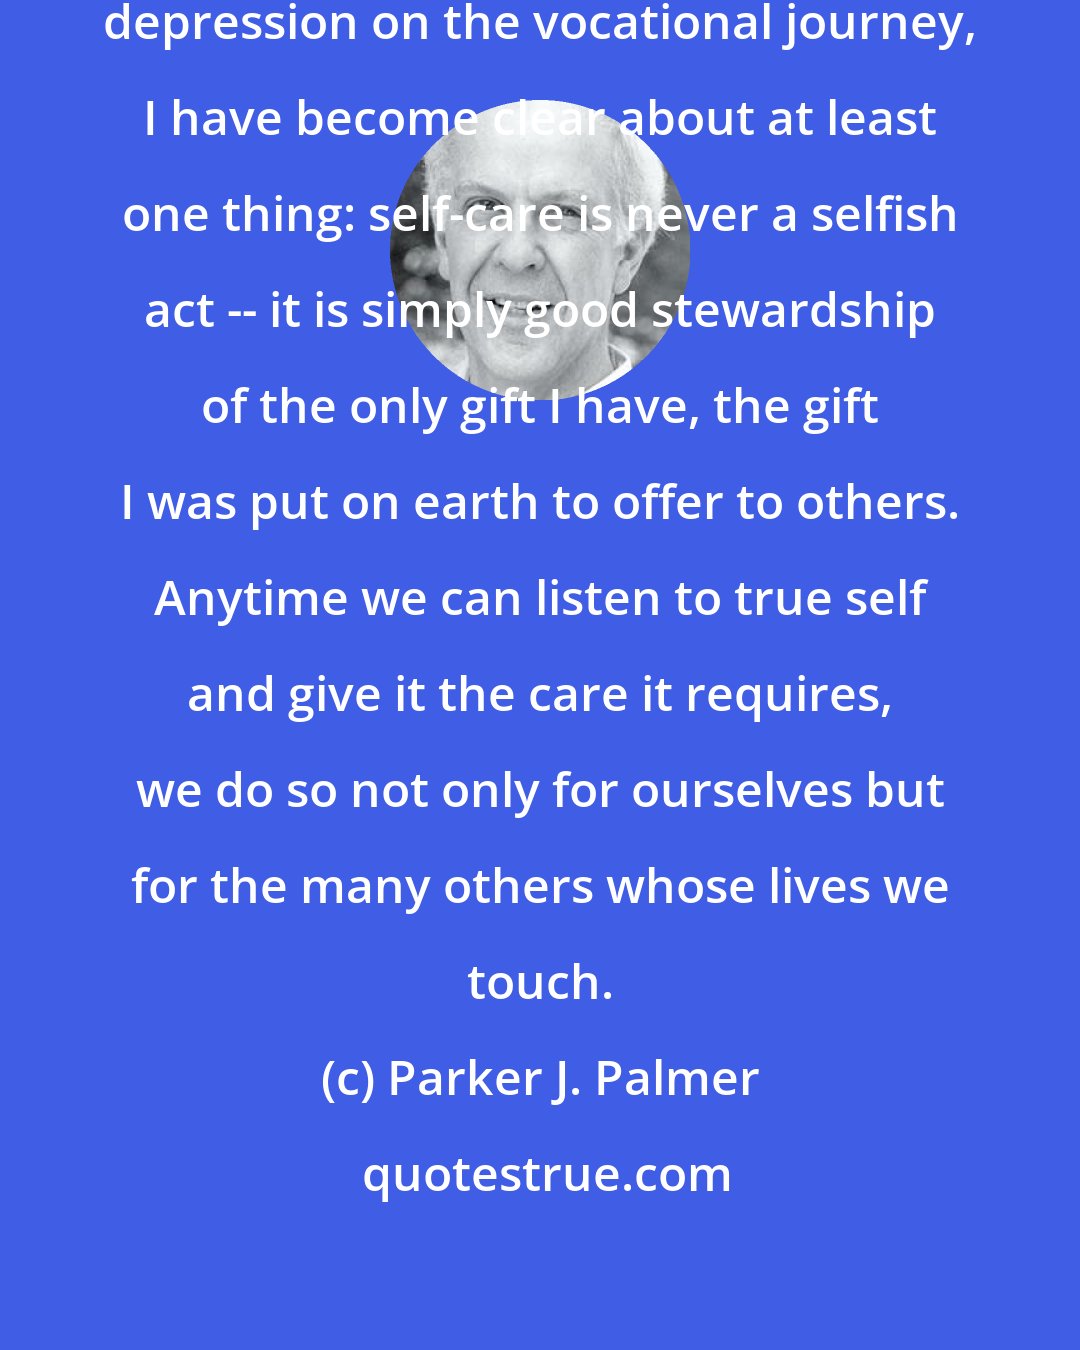 Parker J. Palmer: By surviving passages of doubt and depression on the vocational journey, I have become clear about at least one thing: self-care is never a selfish act -- it is simply good stewardship of the only gift I have, the gift I was put on earth to offer to others. Anytime we can listen to true self and give it the care it requires, we do so not only for ourselves but for the many others whose lives we touch.